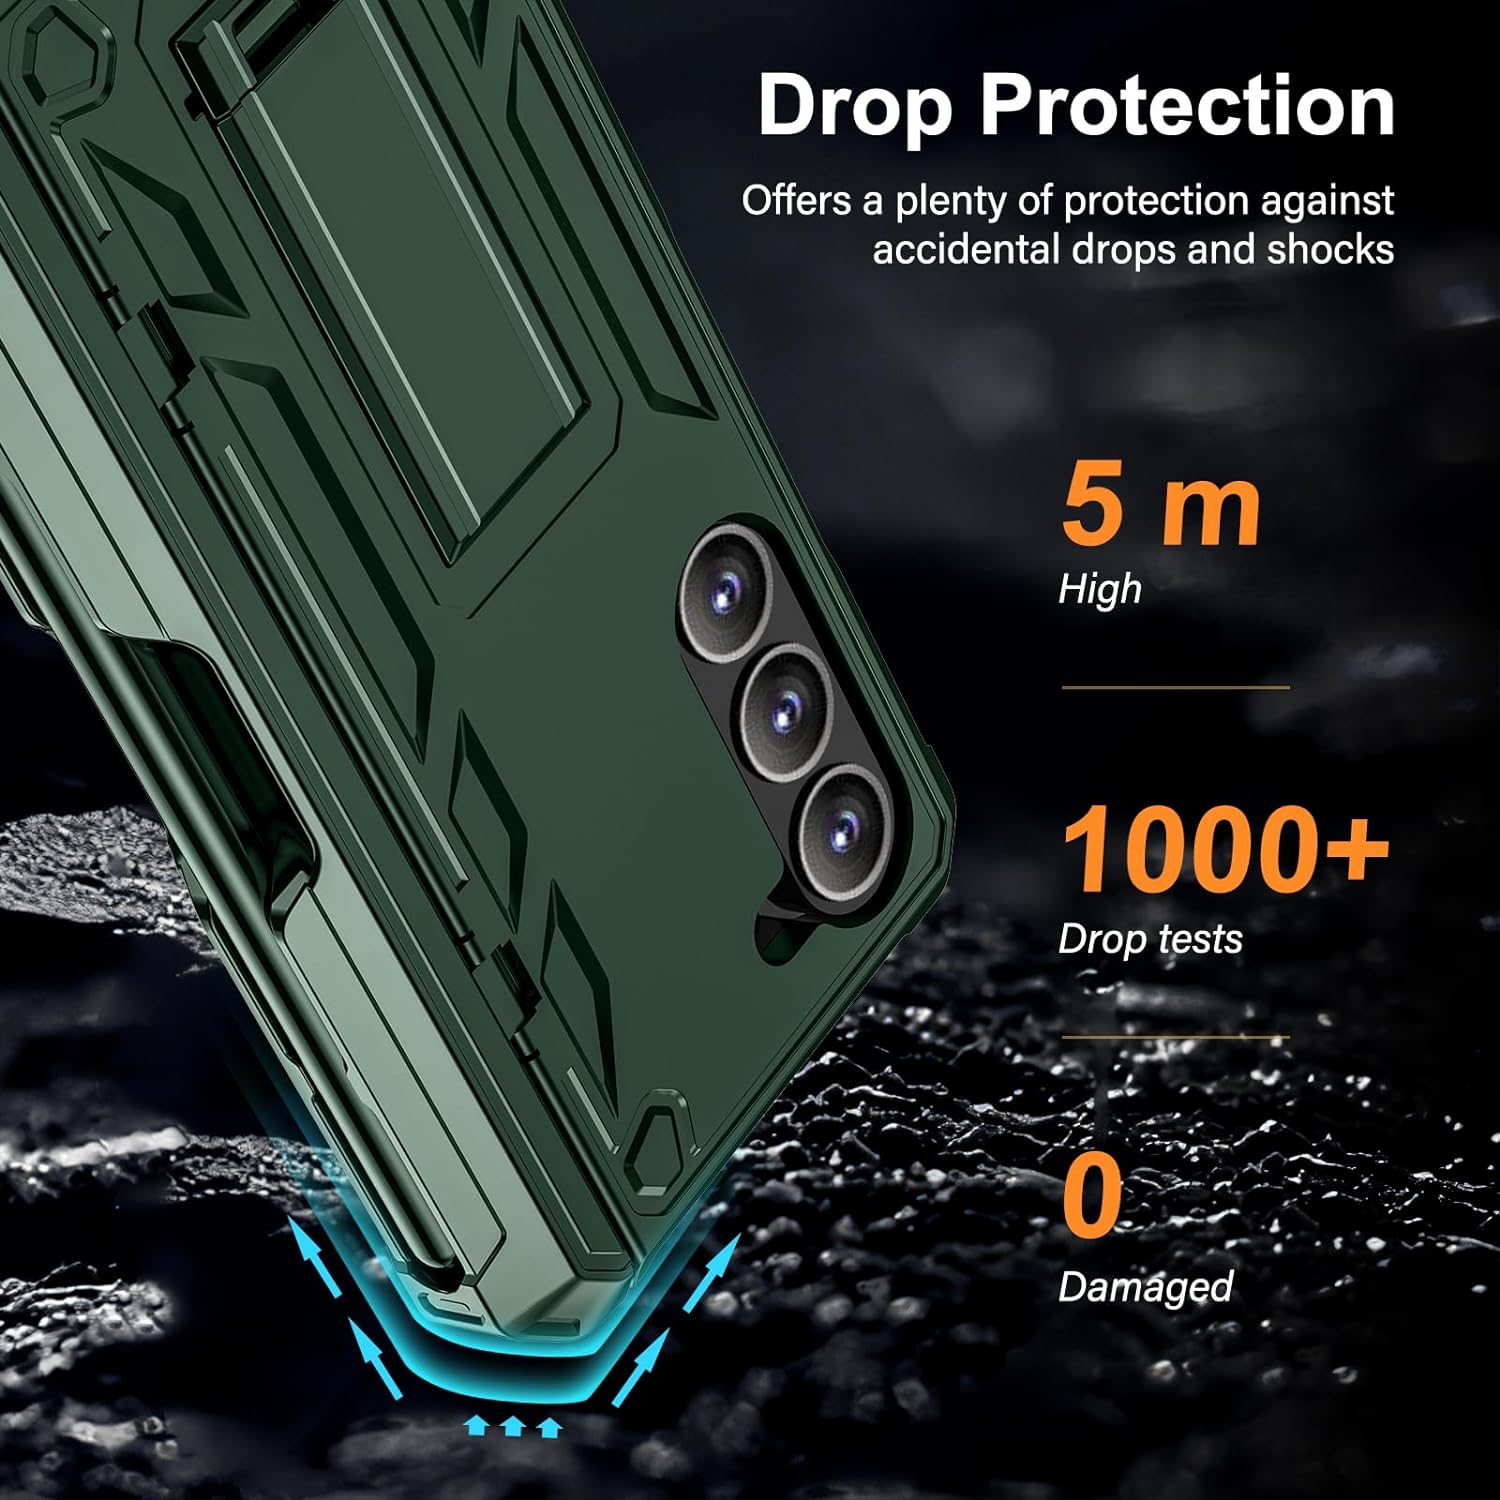 LONTECT for Galaxy Z-Fold 5 5G Case Military Grade Protection Shockproof Heavy Duty Case Built in Screen Protector&S Pen Slot Rugged Drop Protective Cover Case for Samsung Galaxy Z Fold 5,Green